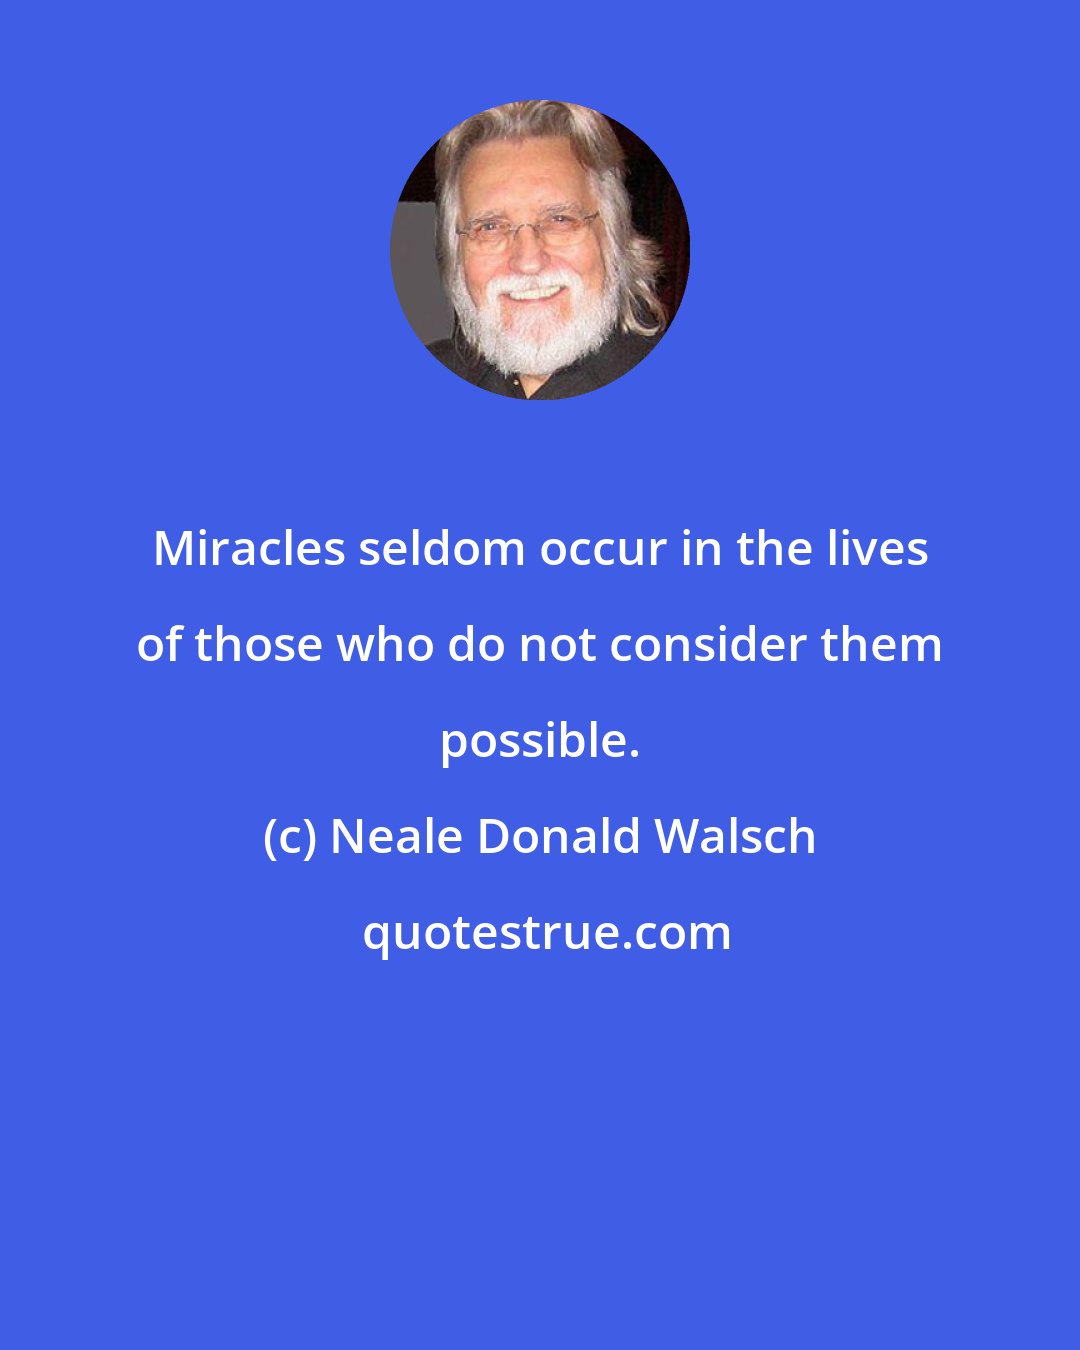 Neale Donald Walsch: Miracles seldom occur in the lives of those who do not consider them possible.